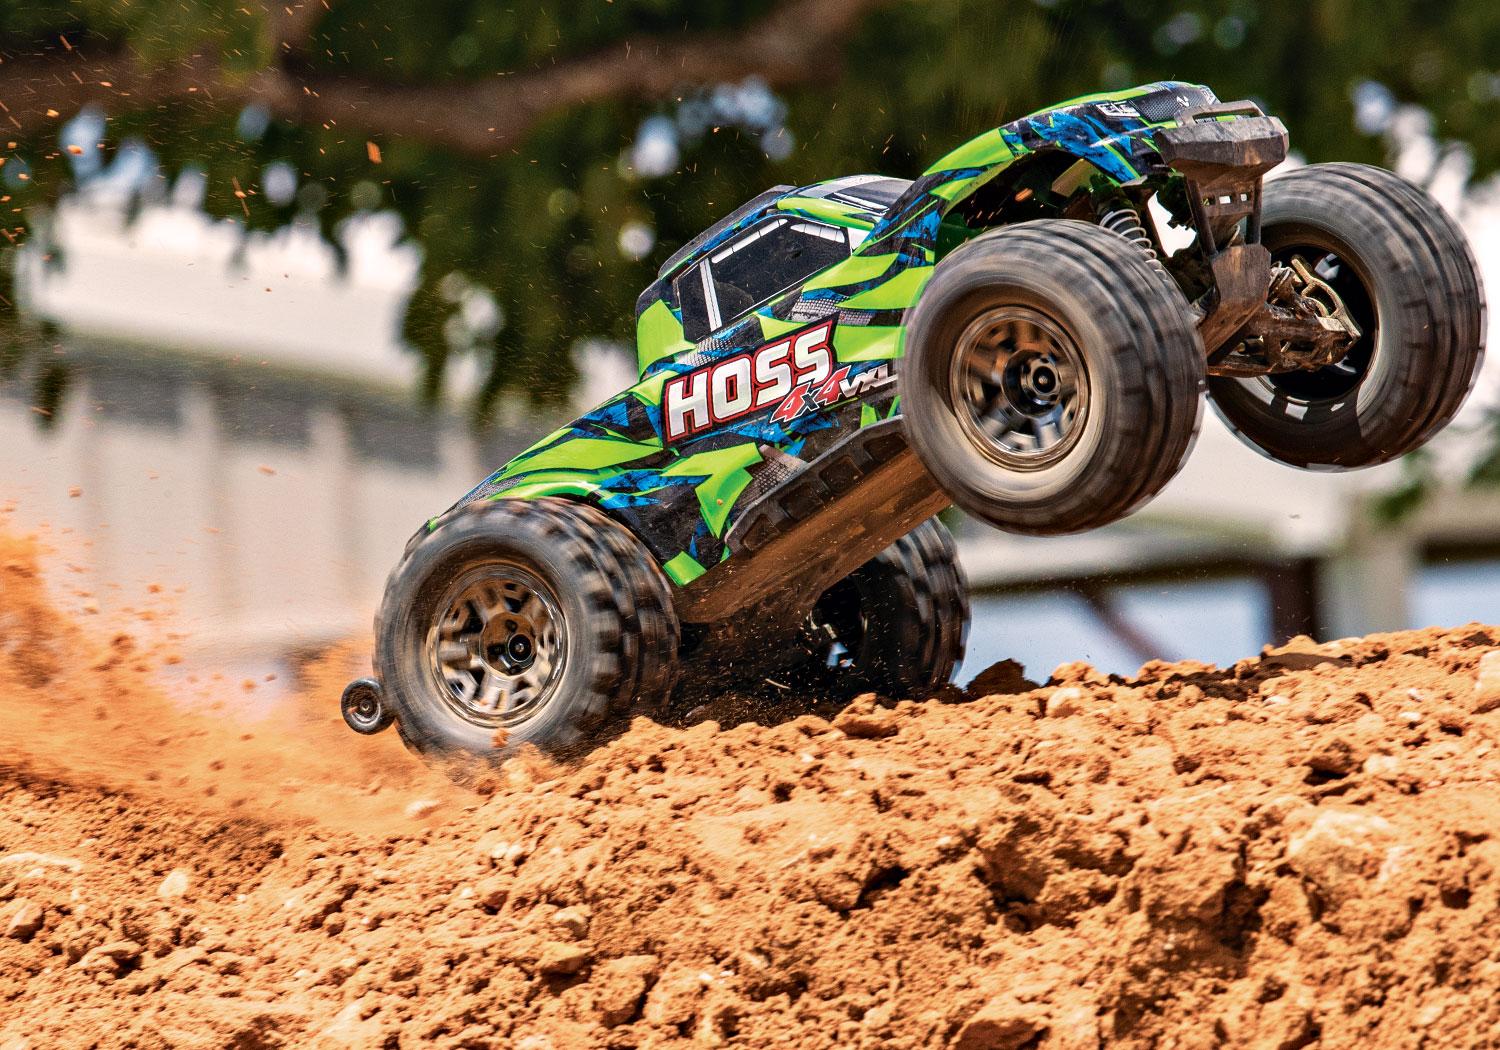 Rc Auto Traxxas: Durable and reliable: A look at Traxxas' top features and brand success